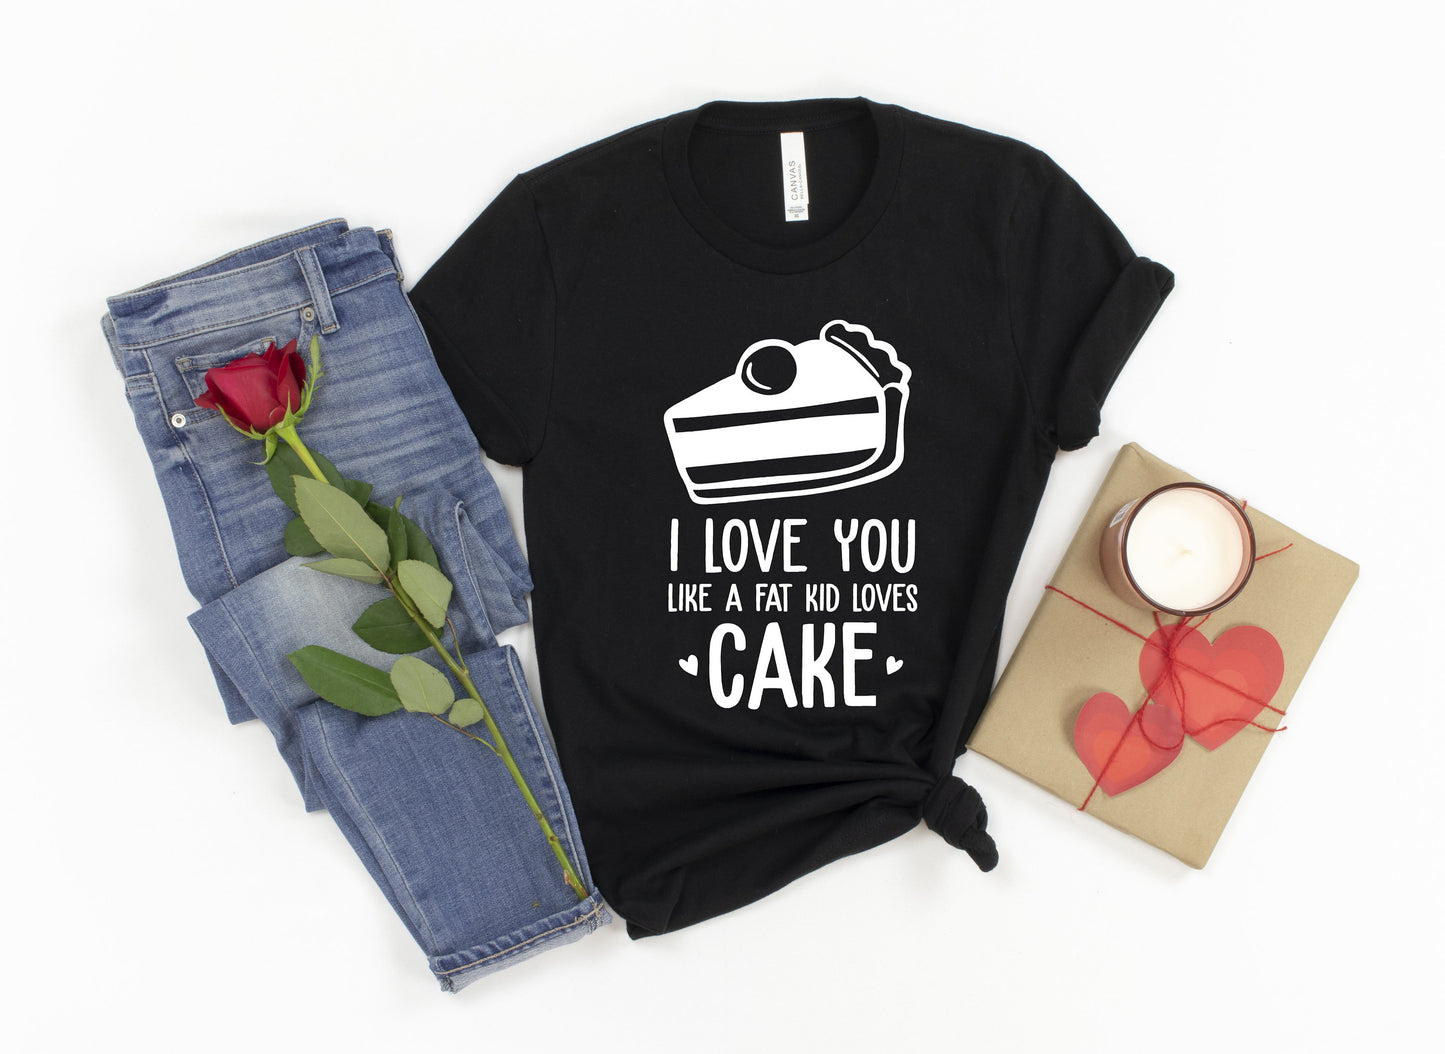 I Love You Like a Fat Kid Loves Cake Valentine's Day Couples t-shirt - Funny Valentine's shirt -Matching Couples Shirts